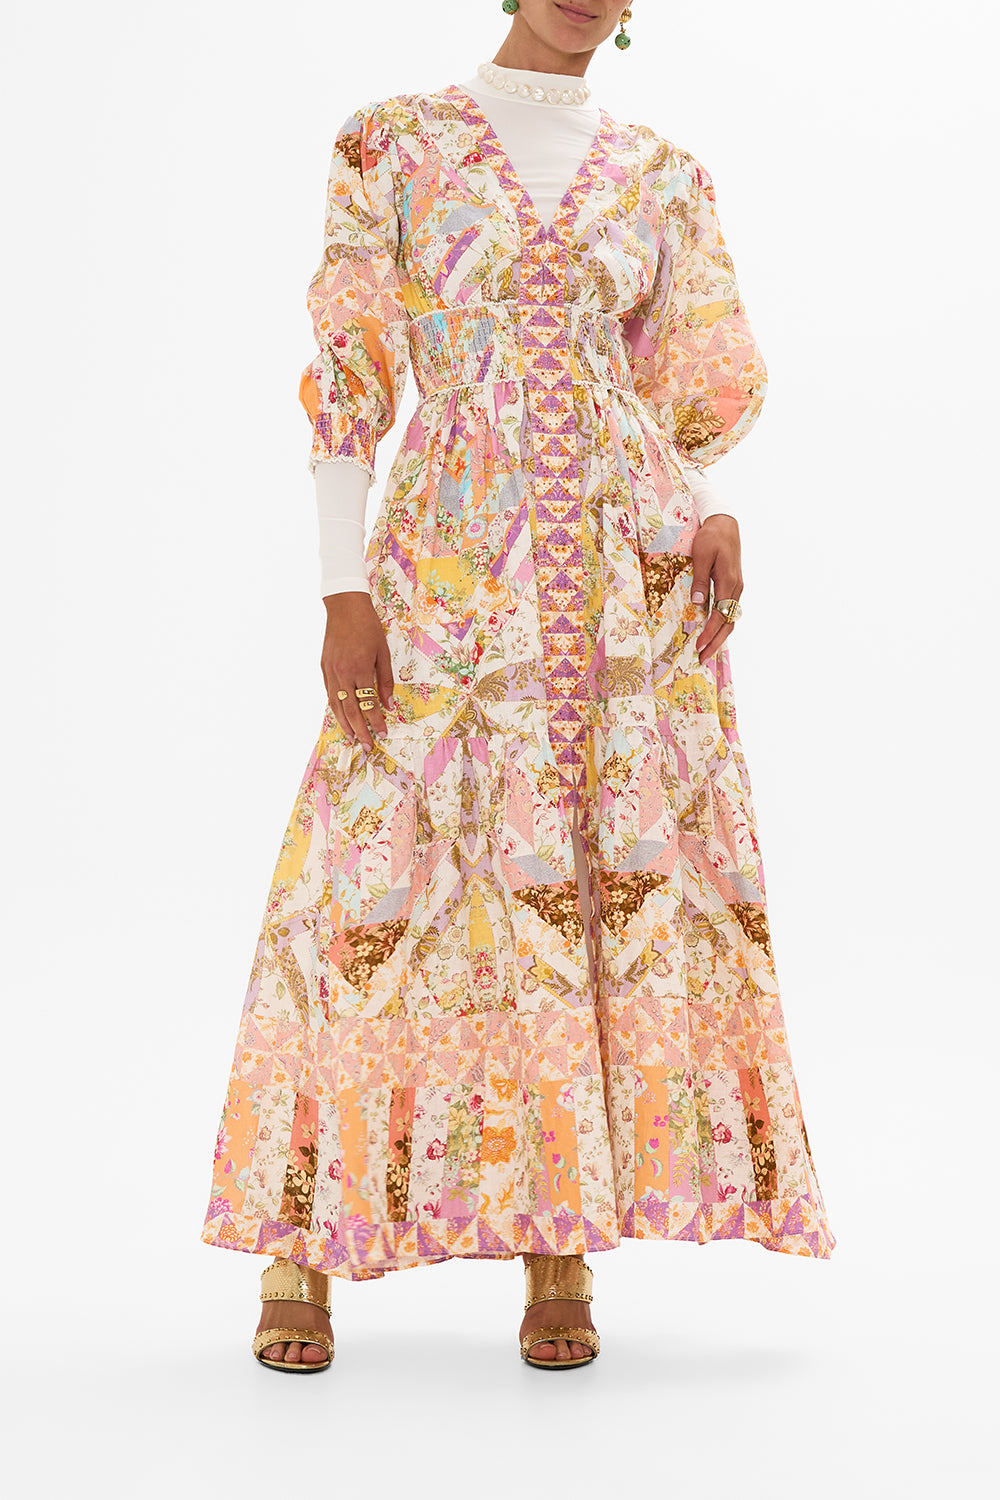 CAMILLA retro floral shirred waistband long dress in Sew Yesterday print.